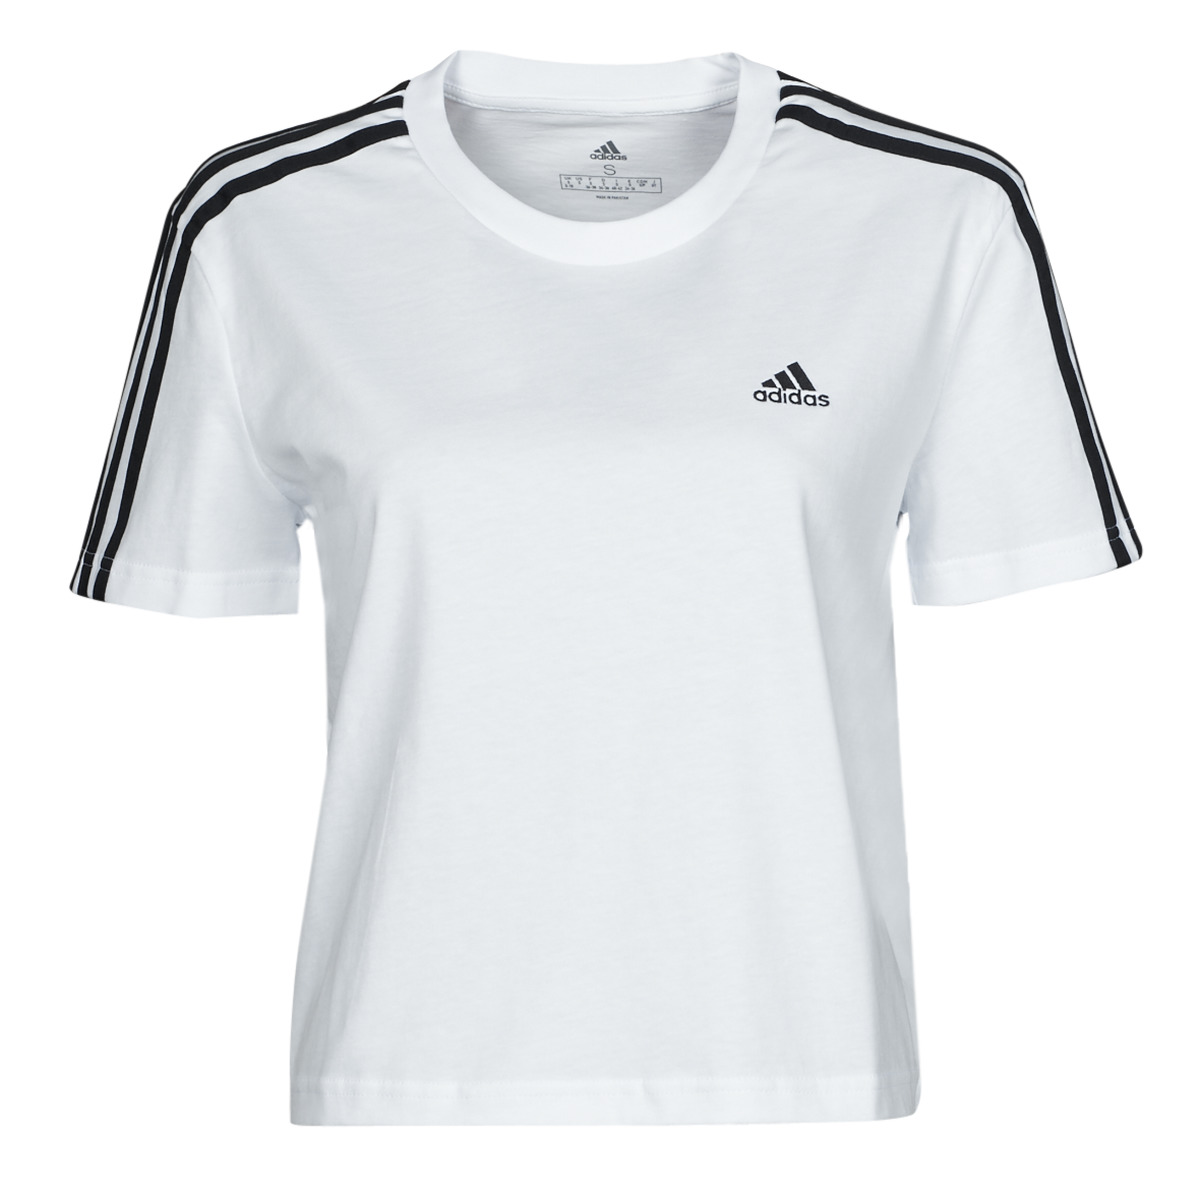 adidas Performance W 3S CRO short-sleeved T - € - delivery Europe Clothing Fast t-shirts White | 22,40 Women Spartoo 